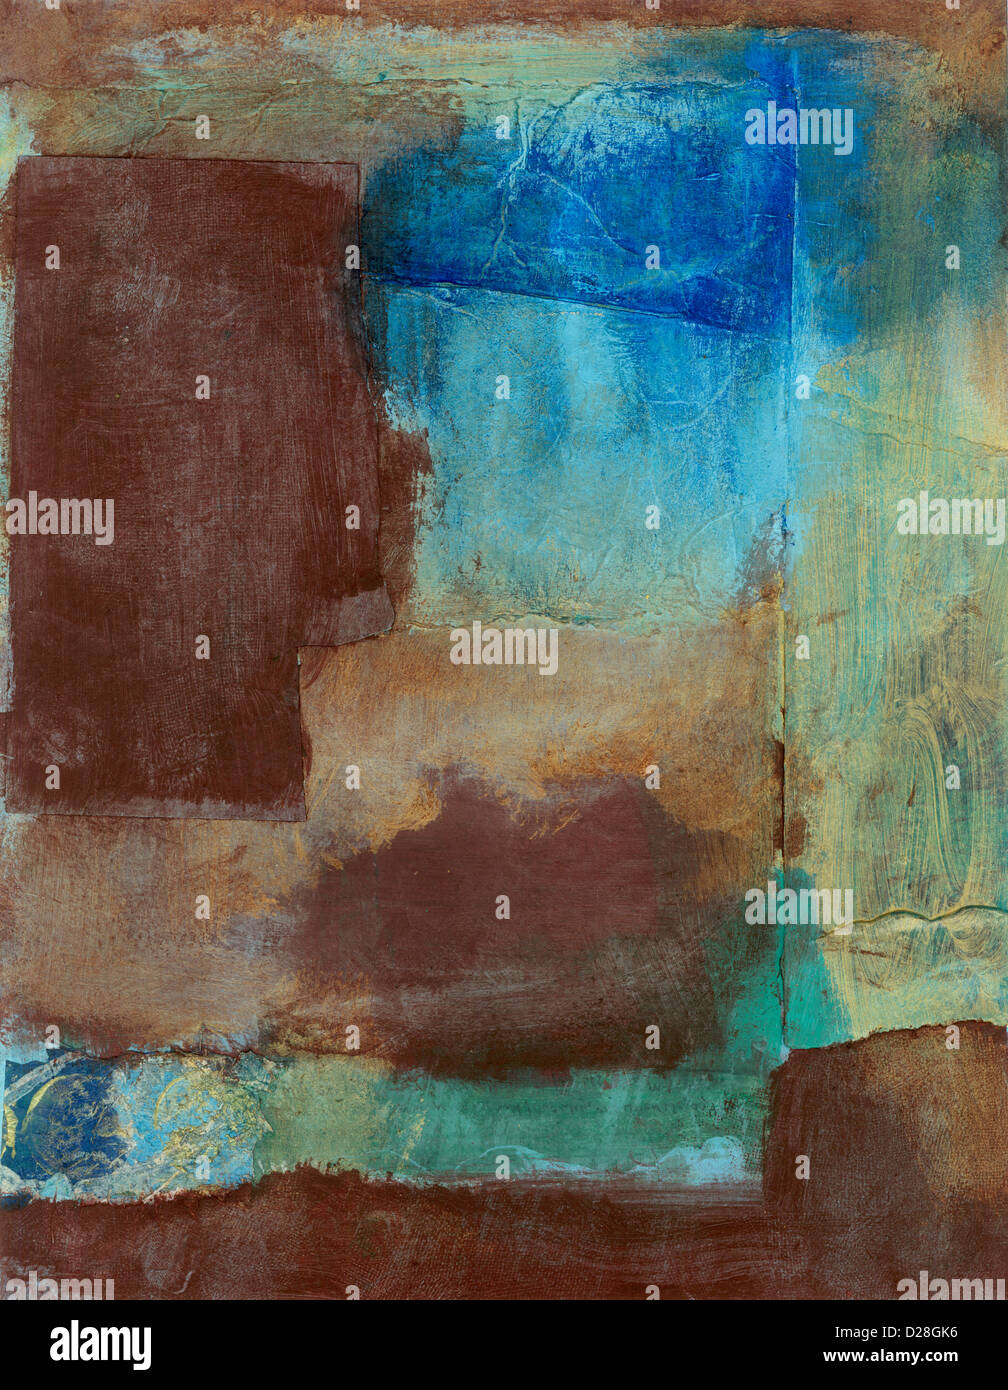 Abstract Painting With Earth Tones Stock Photo - Alamy